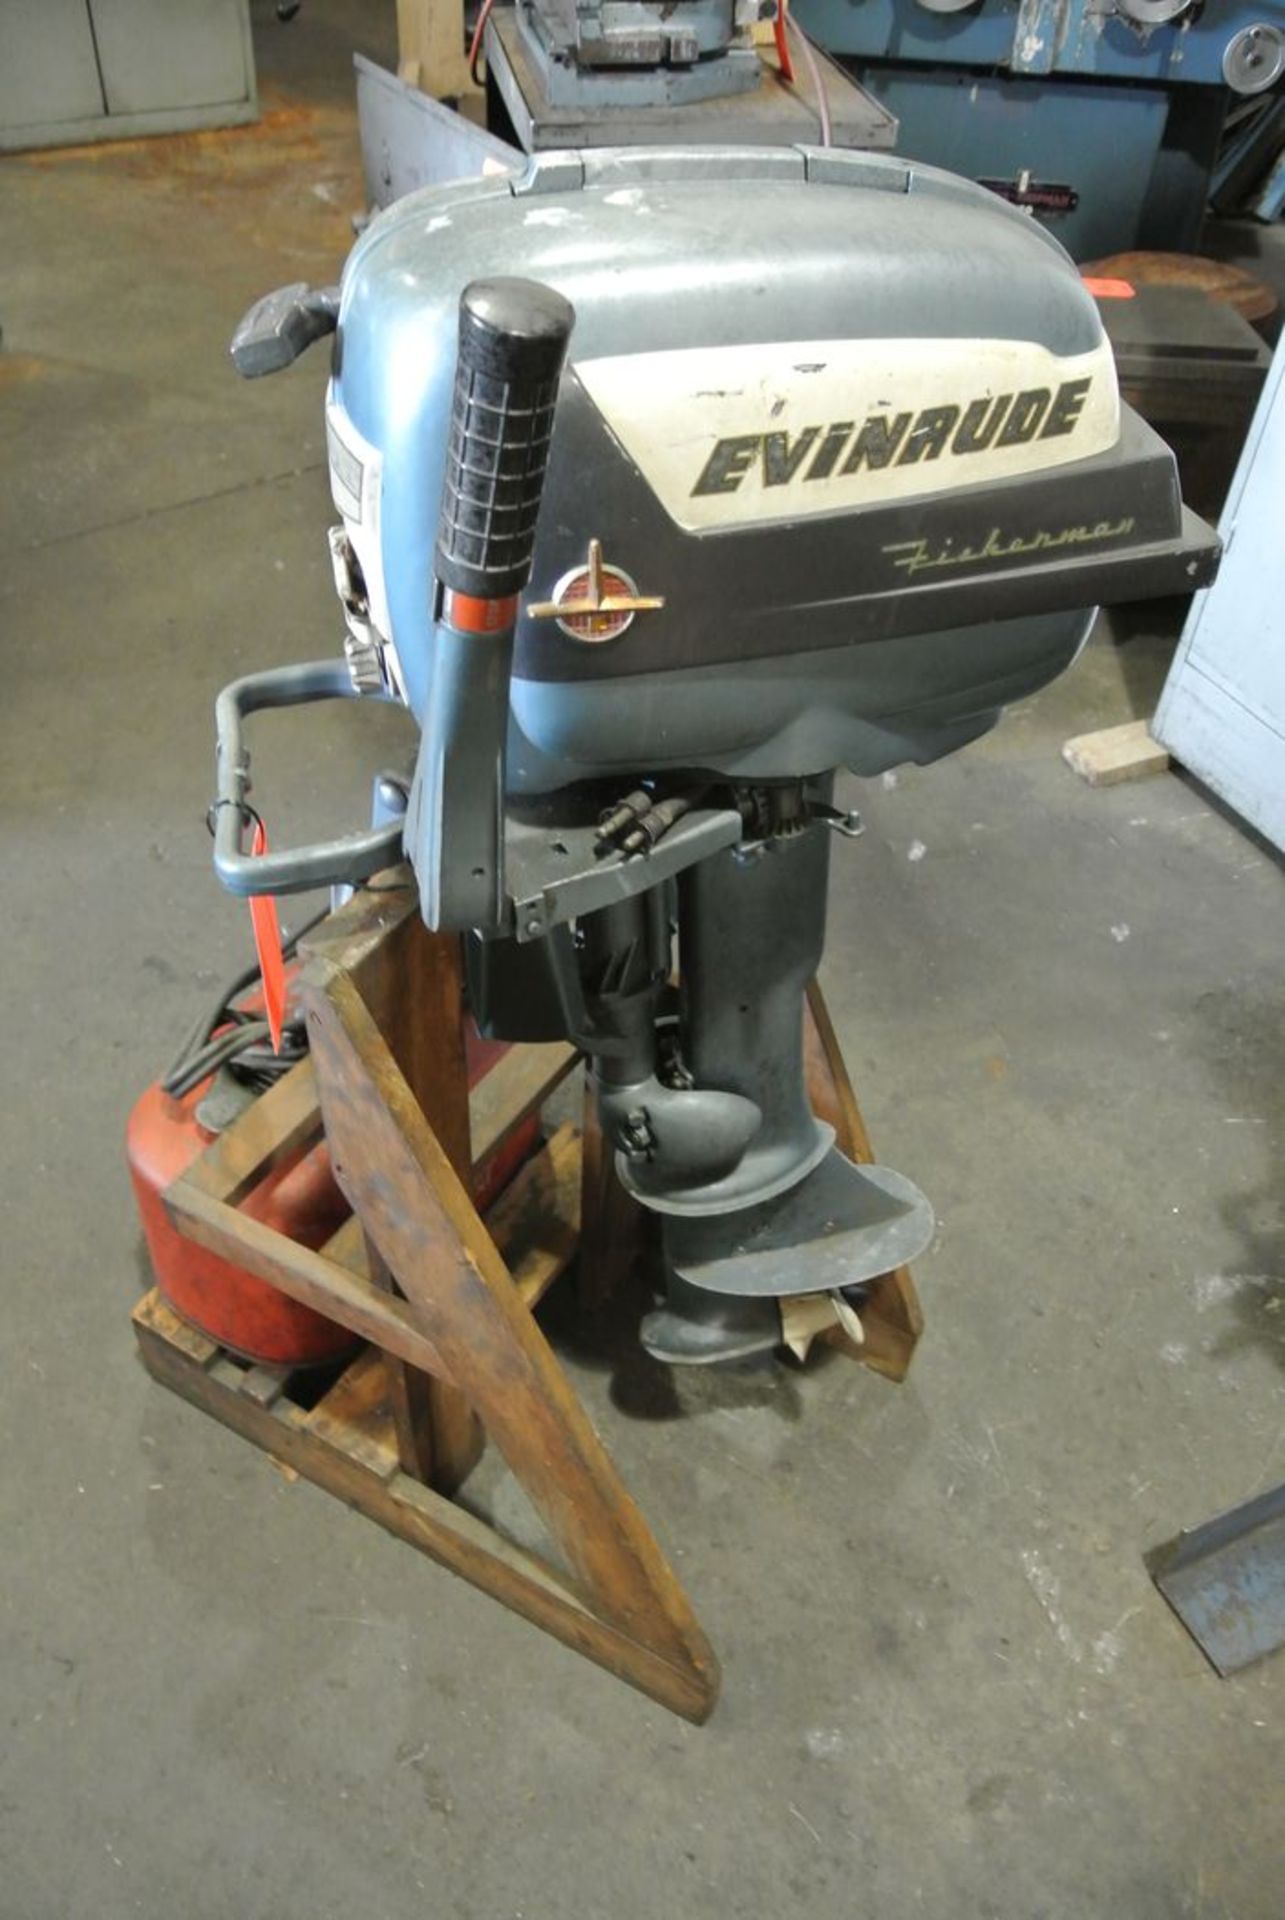 Evinrude Fisherman Outboard Motor; with Stand and Gas Tank